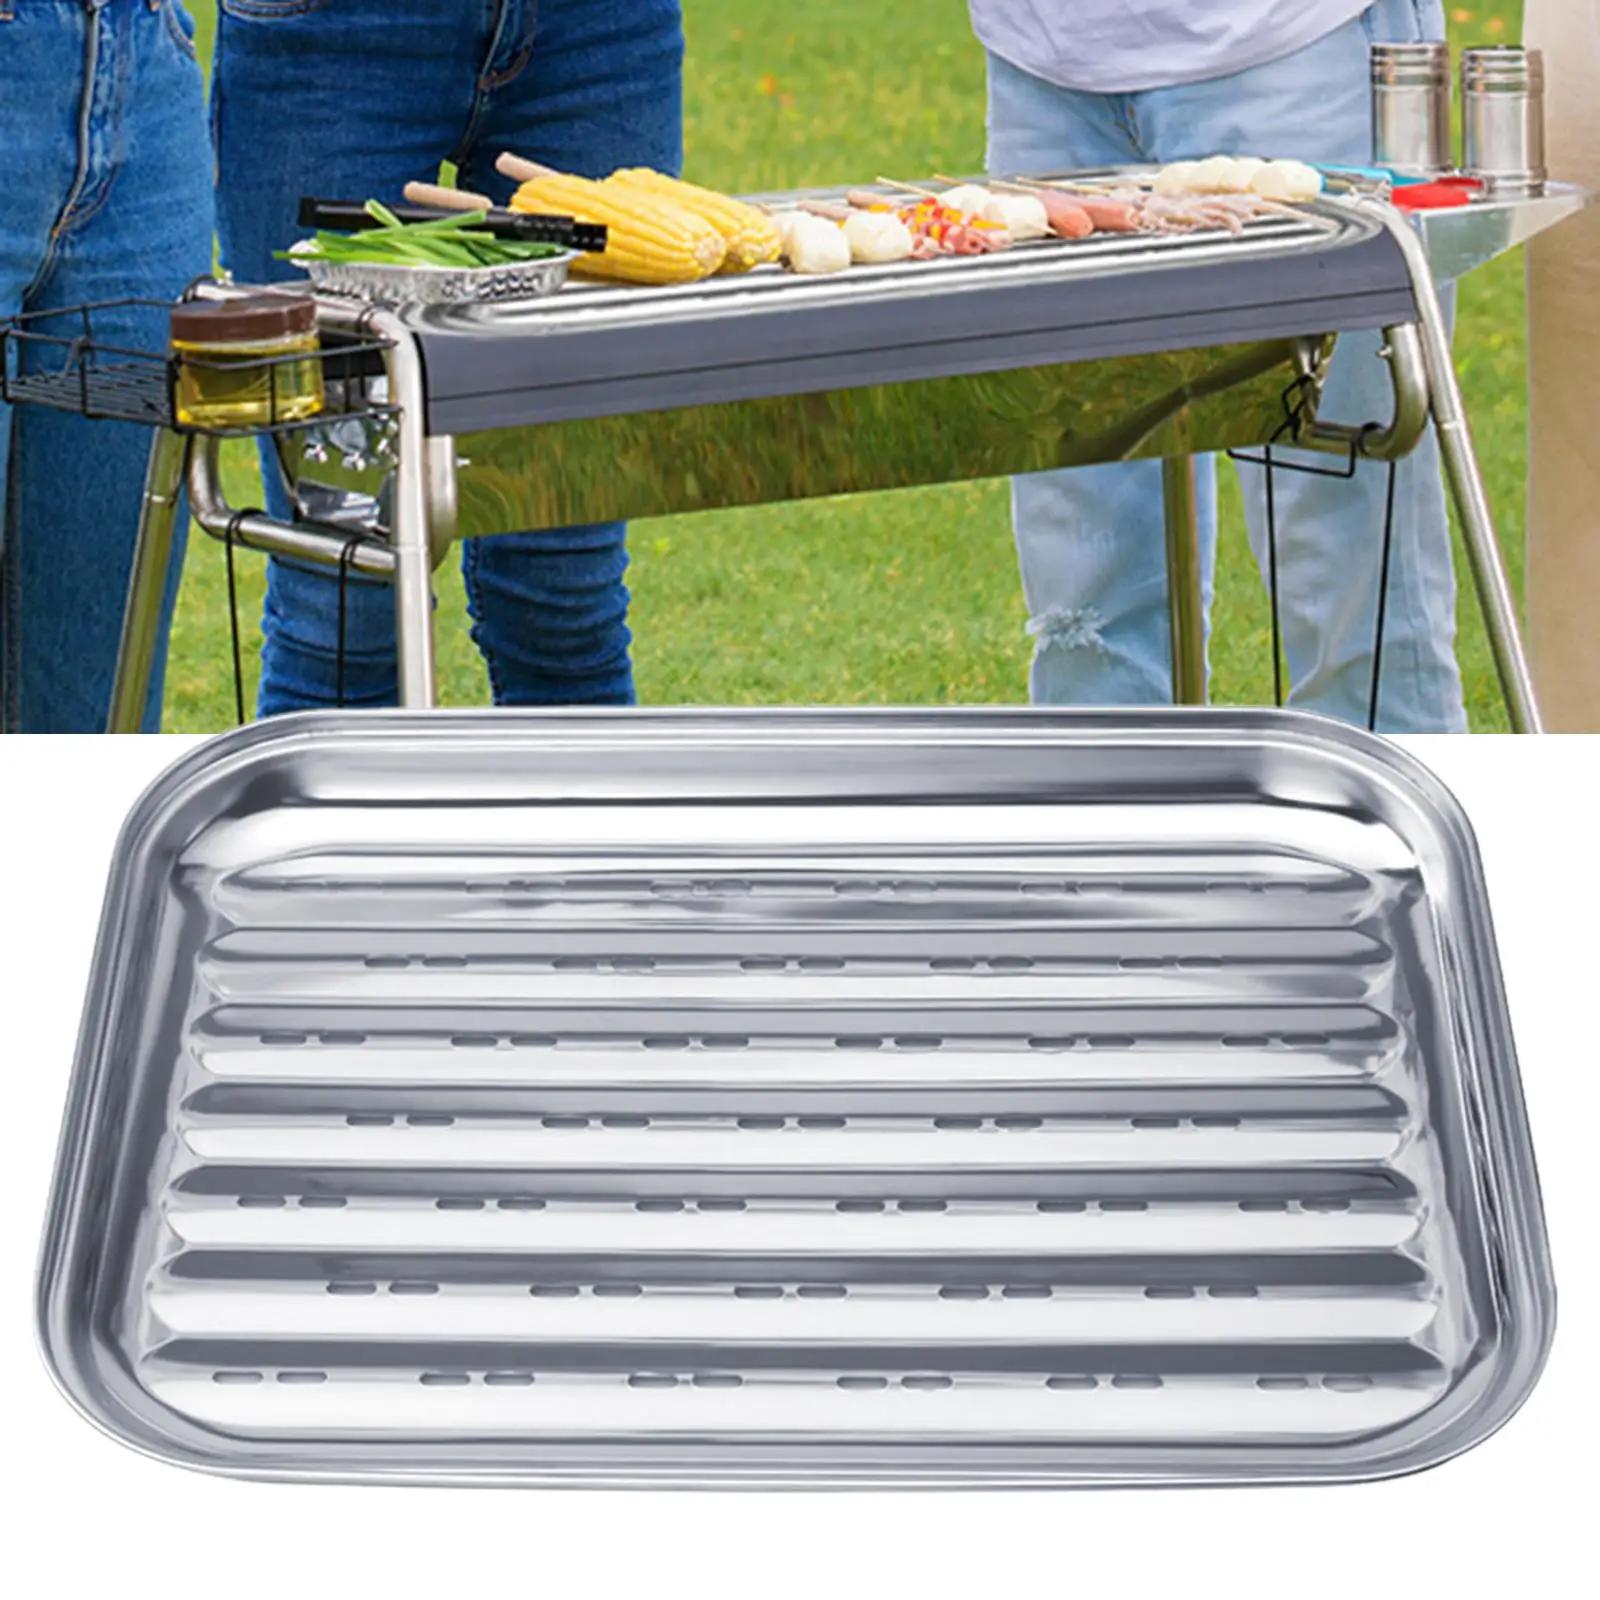 Stainless Steel Baking Oven Tray One Piece Professional Baking Pan Tray for Outdoor Cooking BBQ